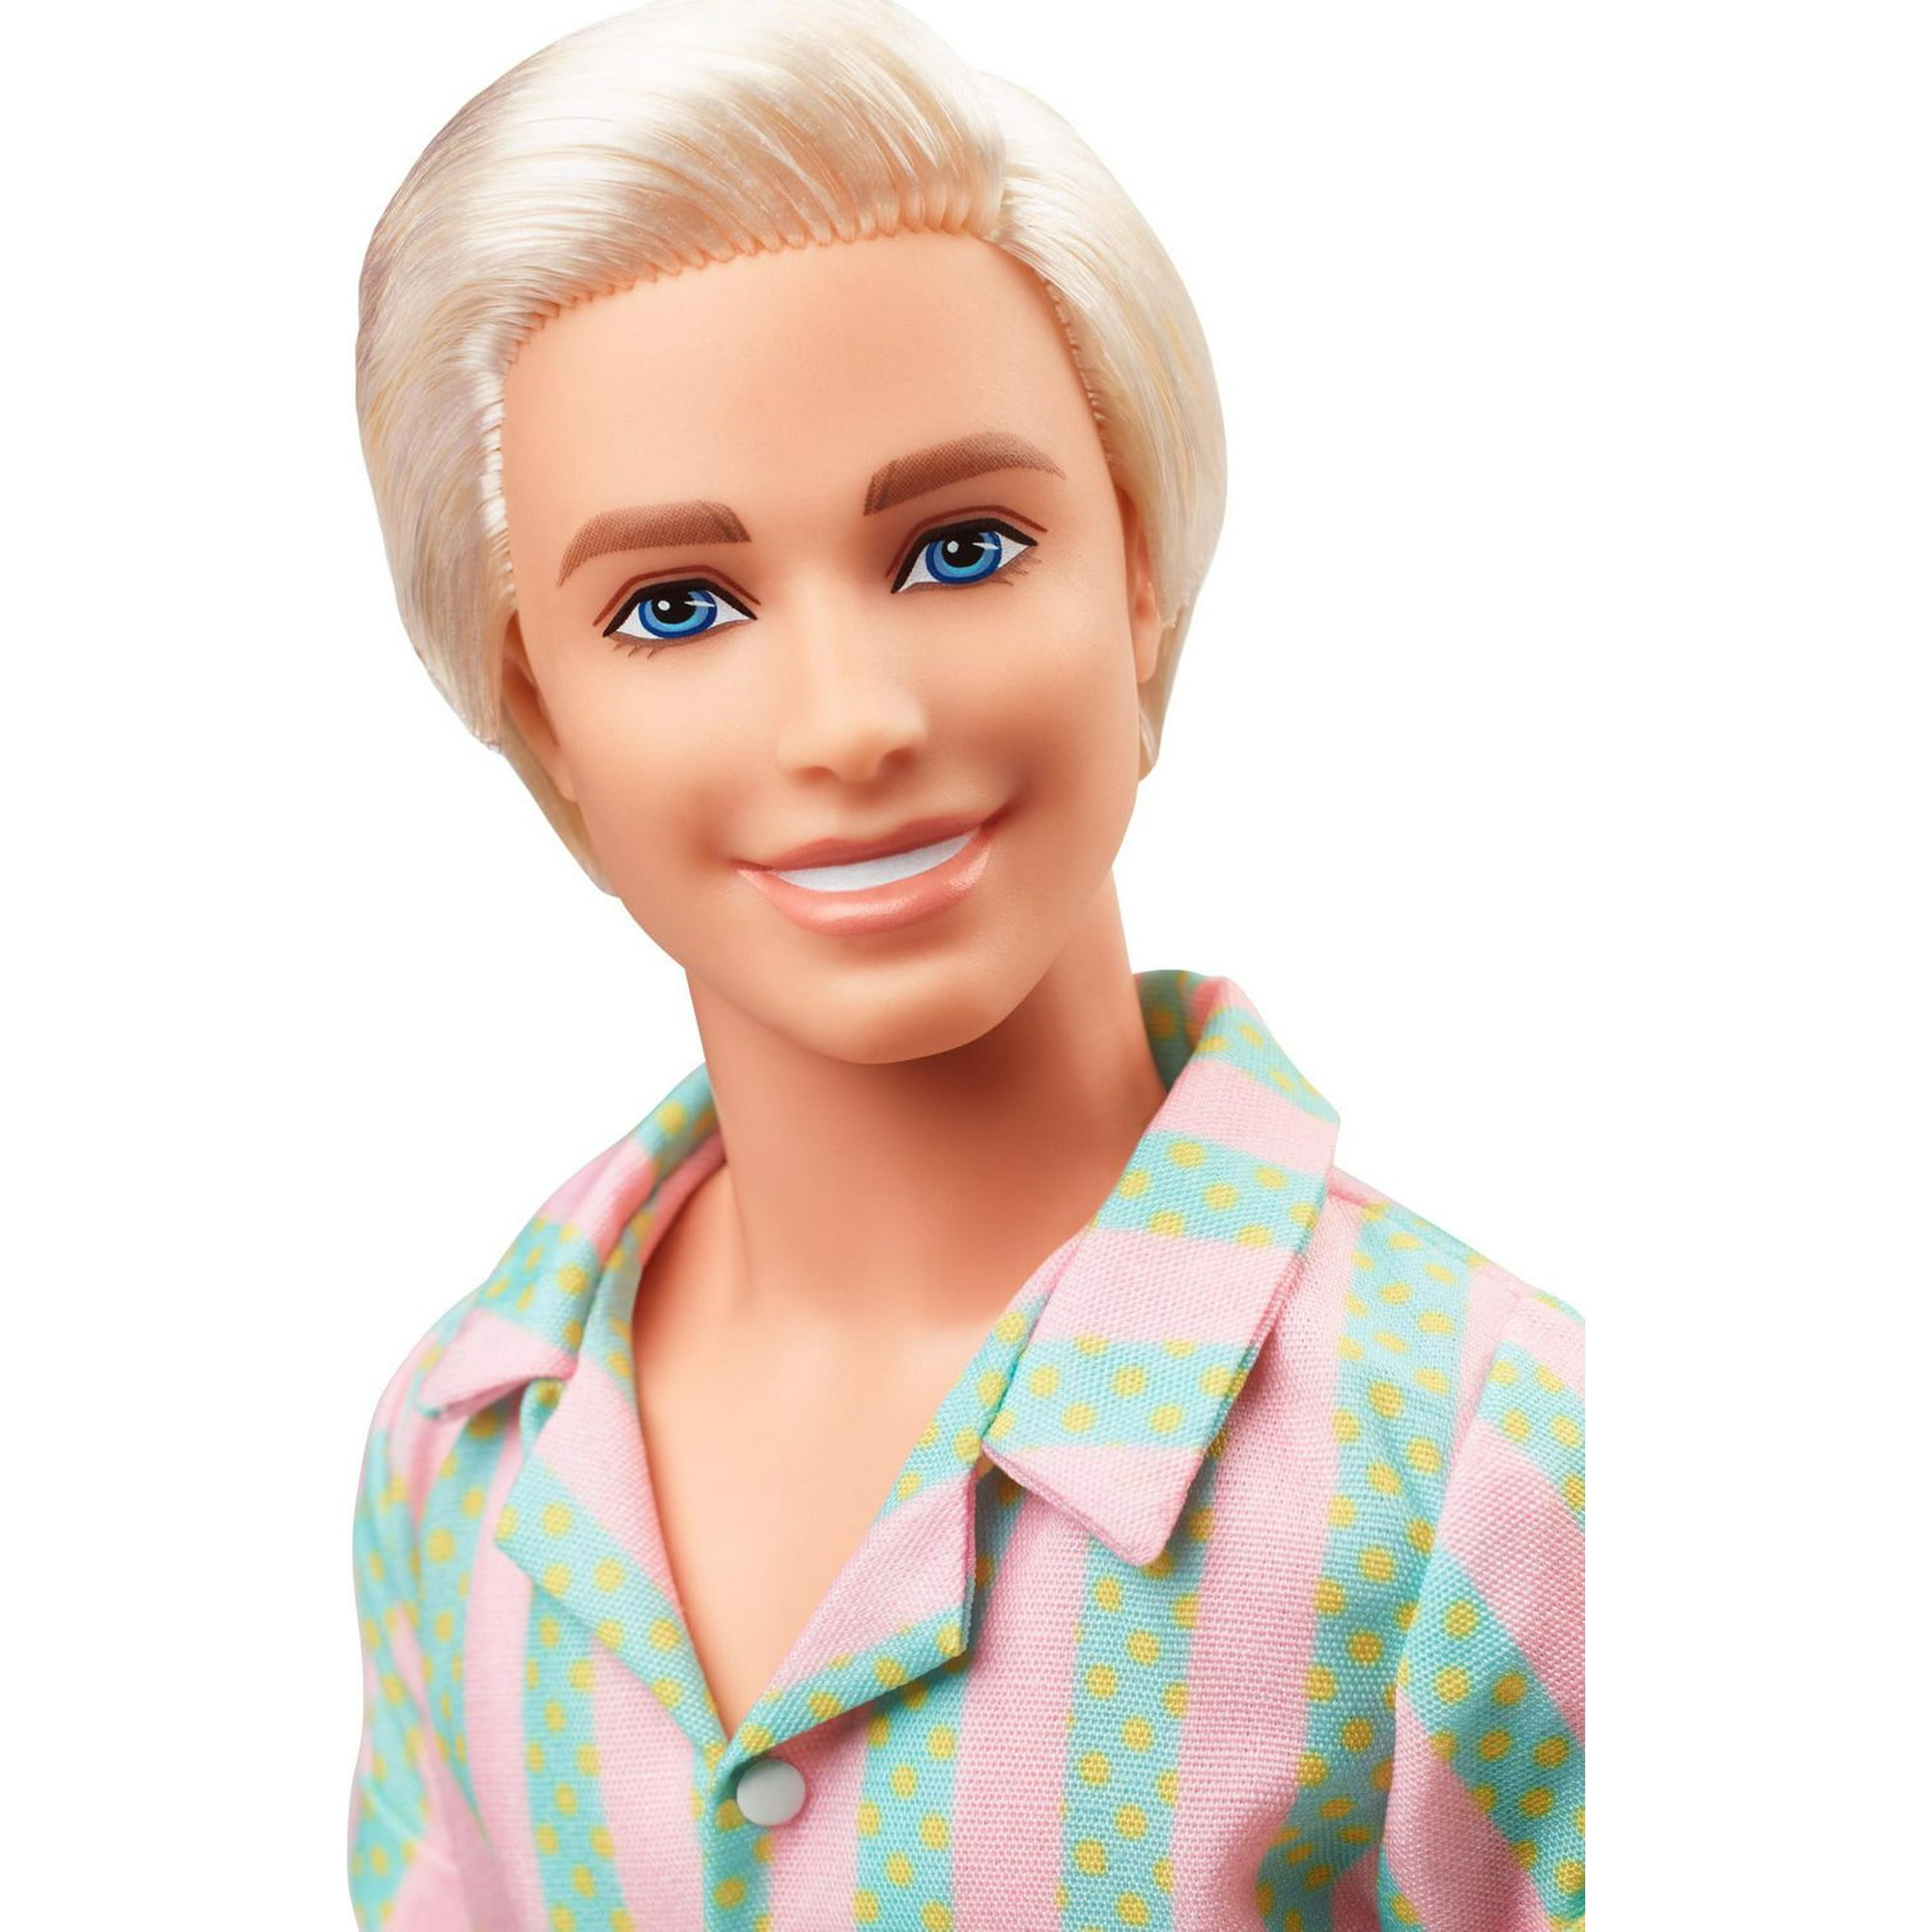 Ken Dolls Got a Makeover With New Body Types, Skin Colors and Hairstyles